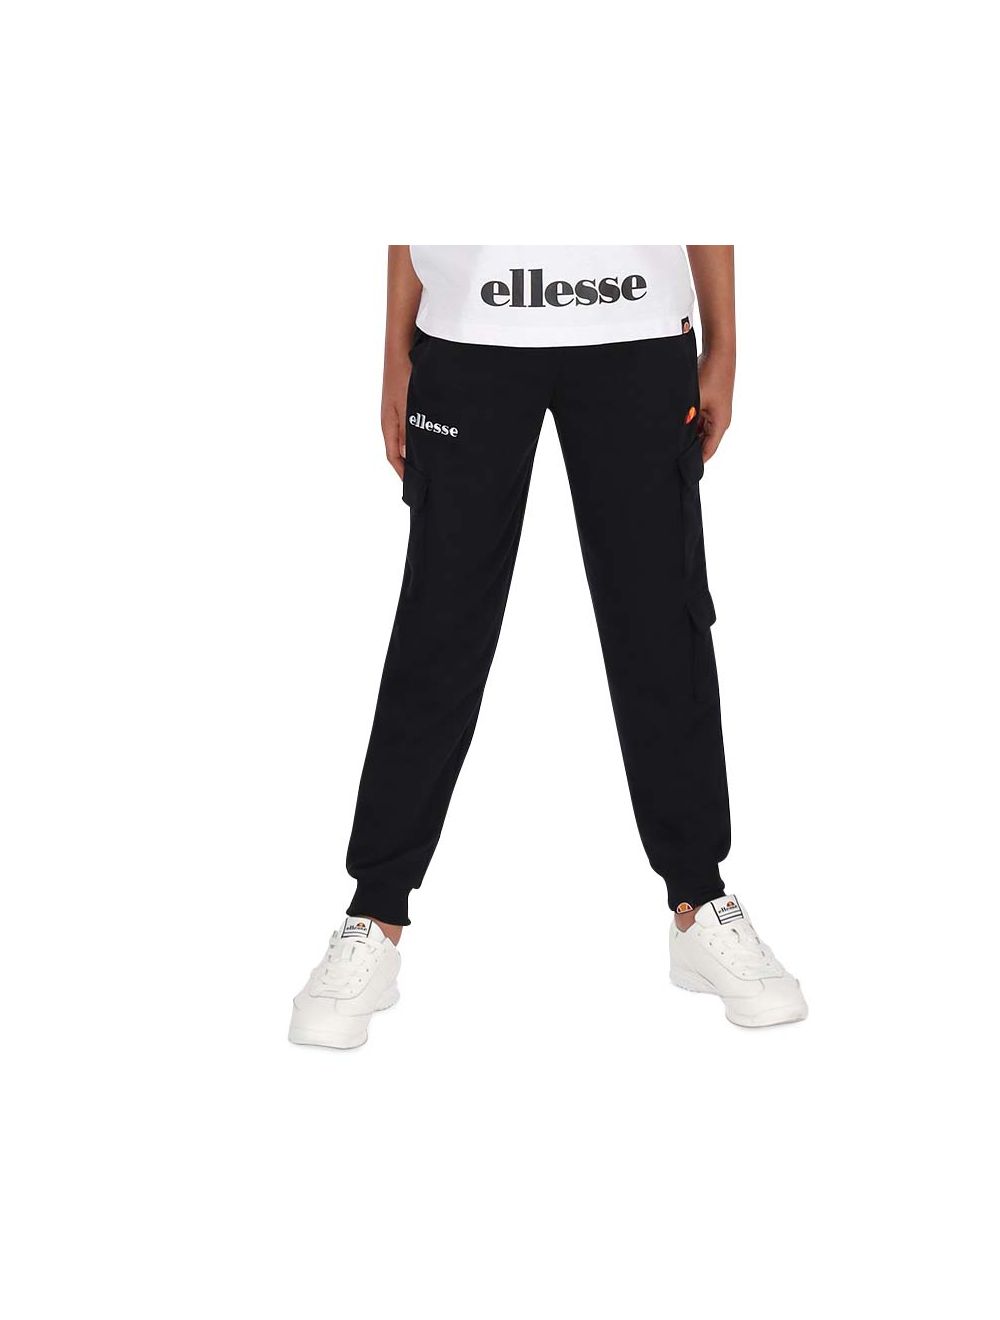 Everything You Need To Know About Ellesse